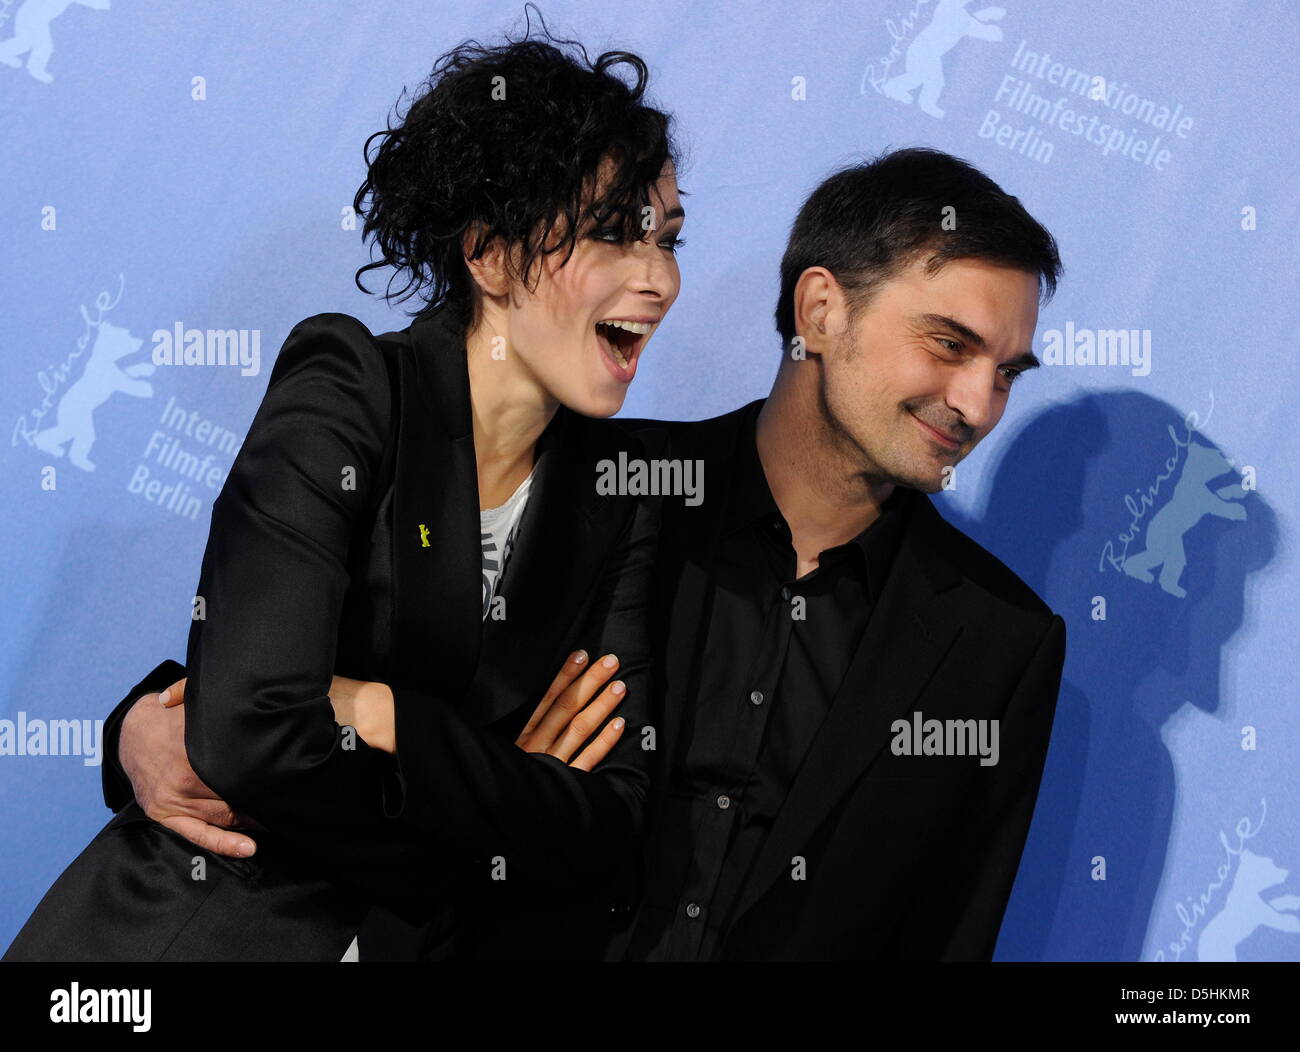 Croatian actress Zrinka Cvitesic (L) and Croatian actor Leon Lucev attend the photocall of the movie 'On the path' (Na putu) during the 60th Berlinale International Film Festival in Berlin, Germany, Wednesday, 18 February 2010. The festival runs until 21 Febuary 2010. Photo: TIM BRAKEMEIER Stock Photo